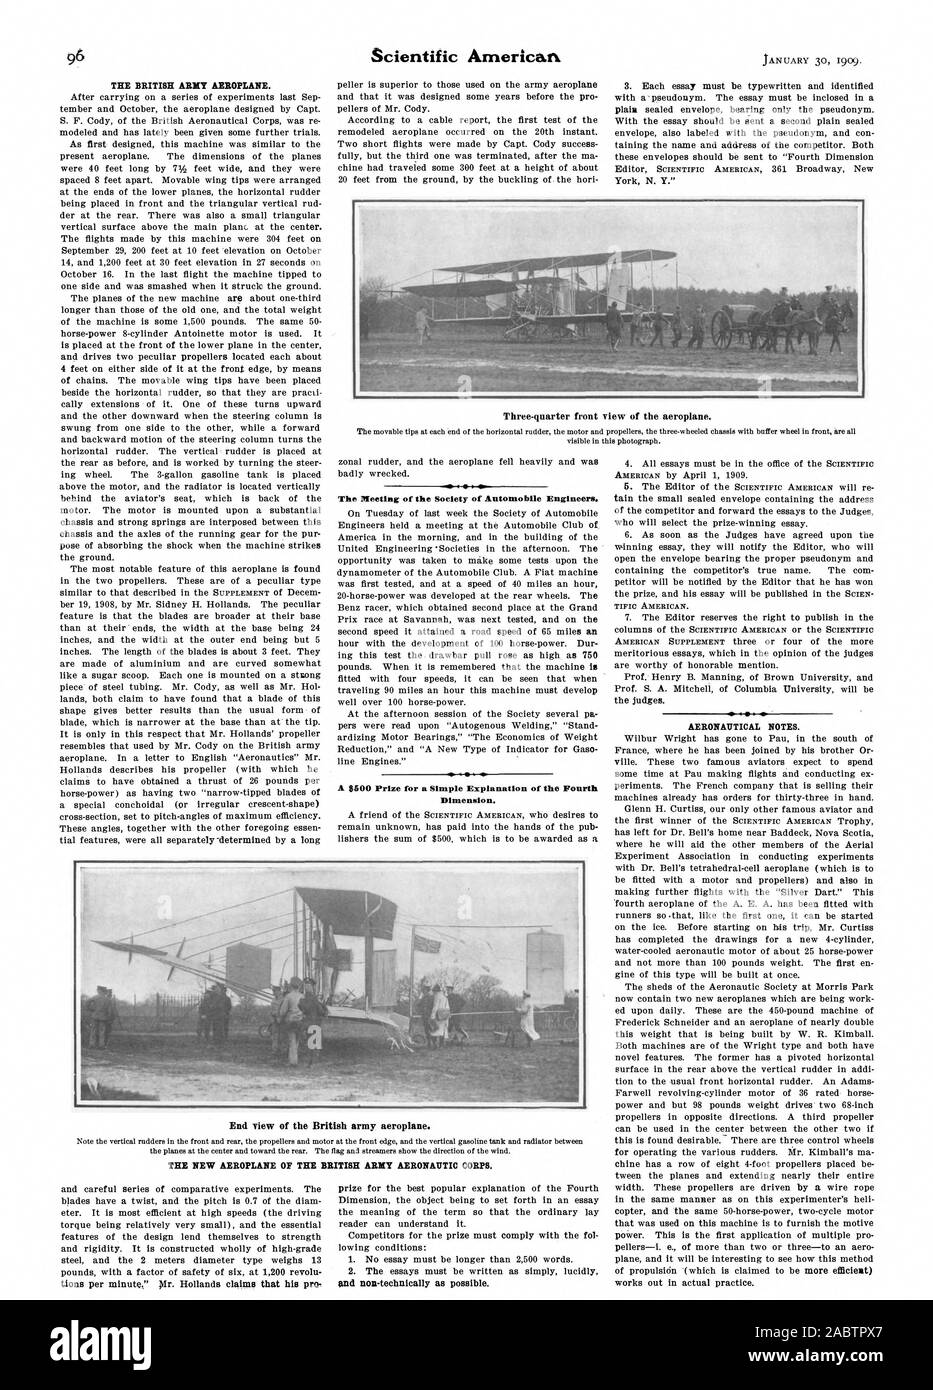 THE BRITISH ARMY AEROPLANE. tions per minute' Ir. Hollands claims that his pre The Meeting of the Society of Automobile Engineers. Dimension. AERONAUTICAL NOTES. End view of the British army aeroplane. THE NEW AEROPLANE OF THE BRITISH ARMY AERONAUTIC CORPS Three-quarter front view of the aeroplane., scientific american, -1909-01-30 Stock Photo